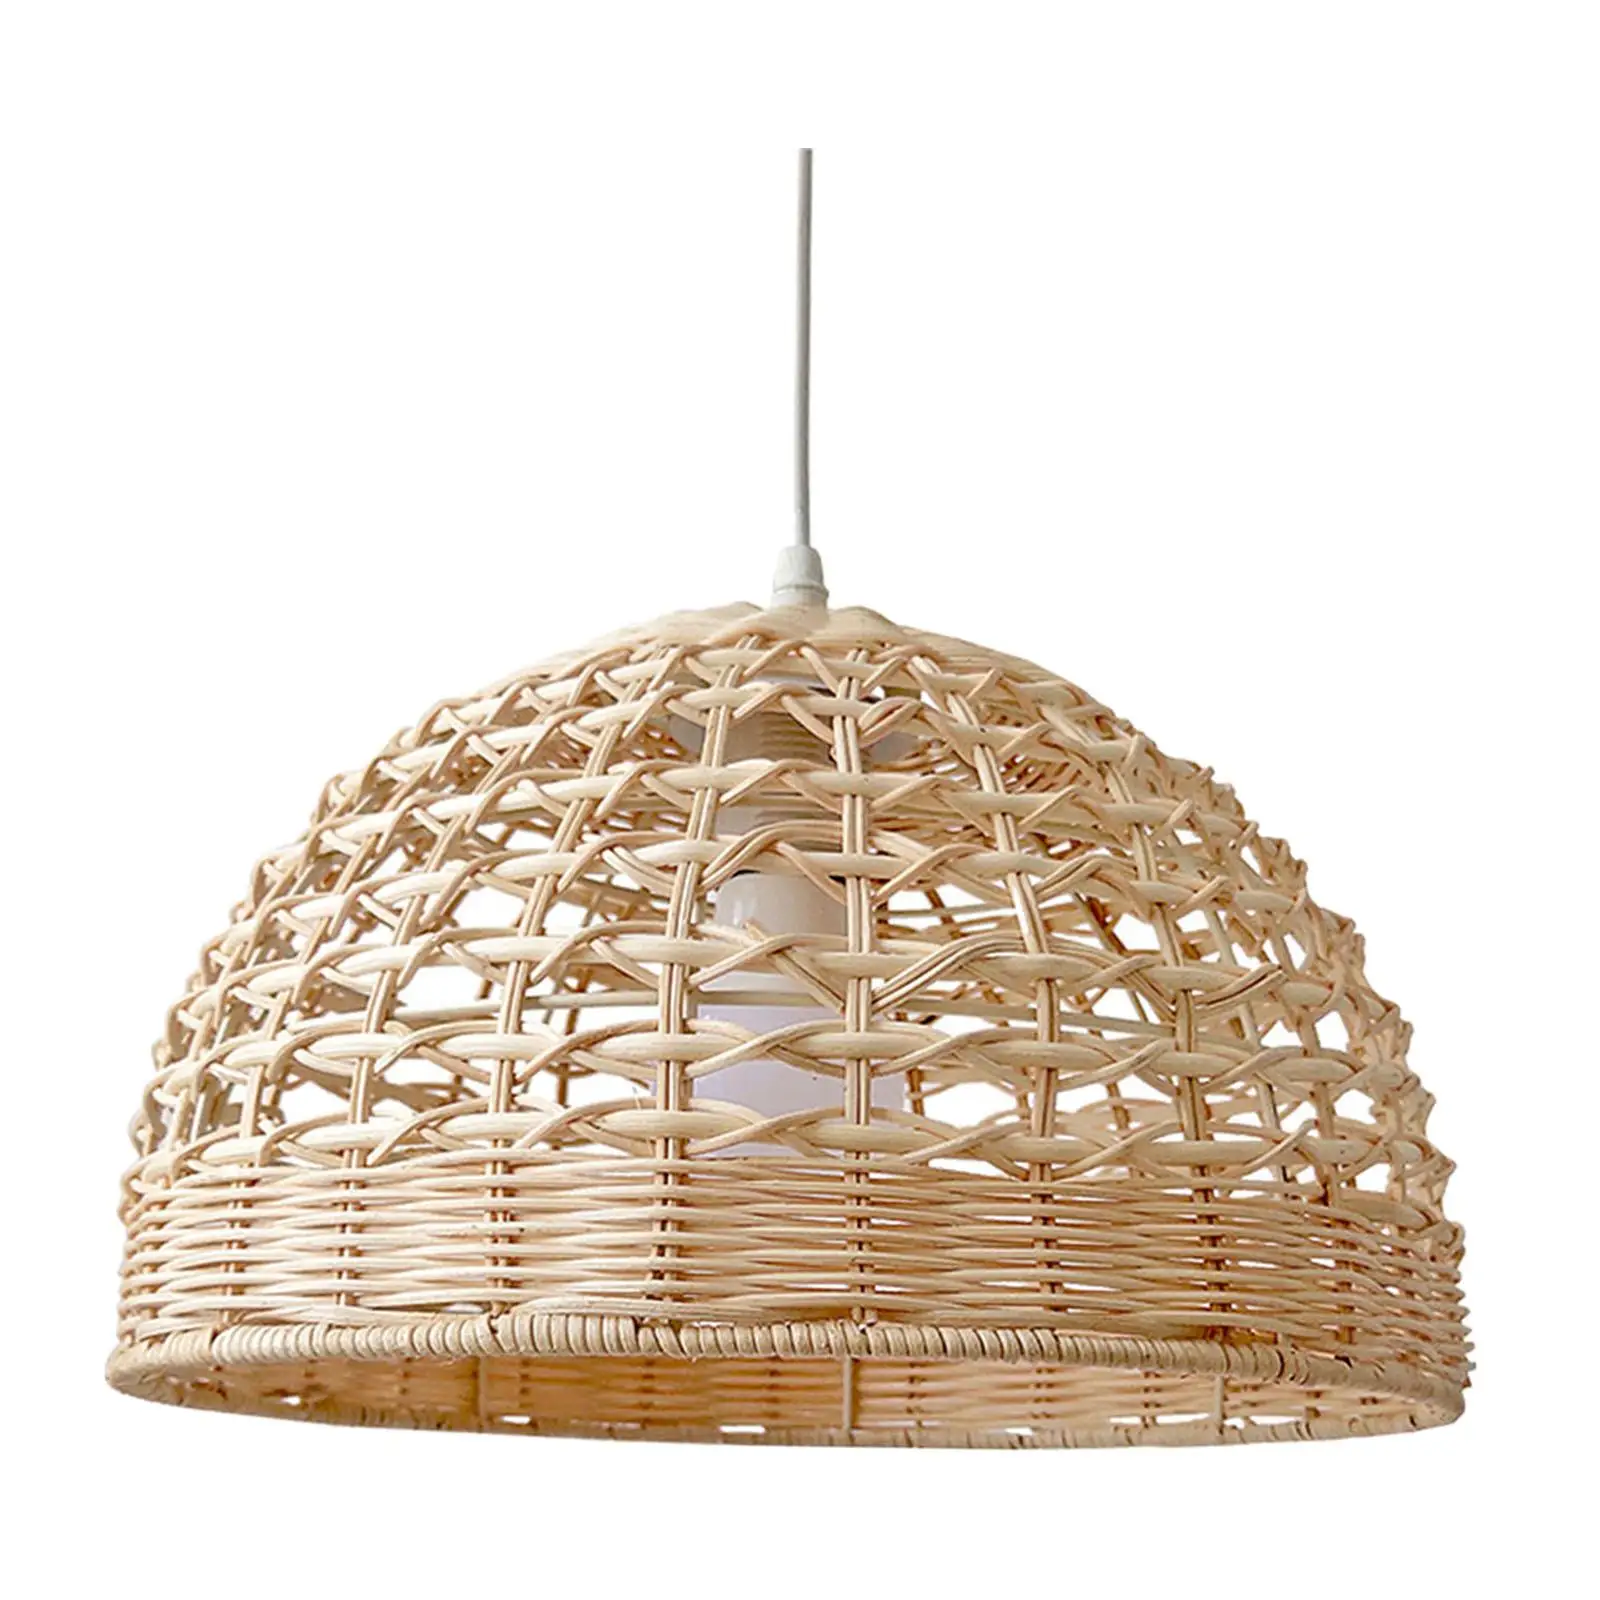 Rattan lampshade rattan chandelier lampshade wicker pendant light cover for hotel thumb200